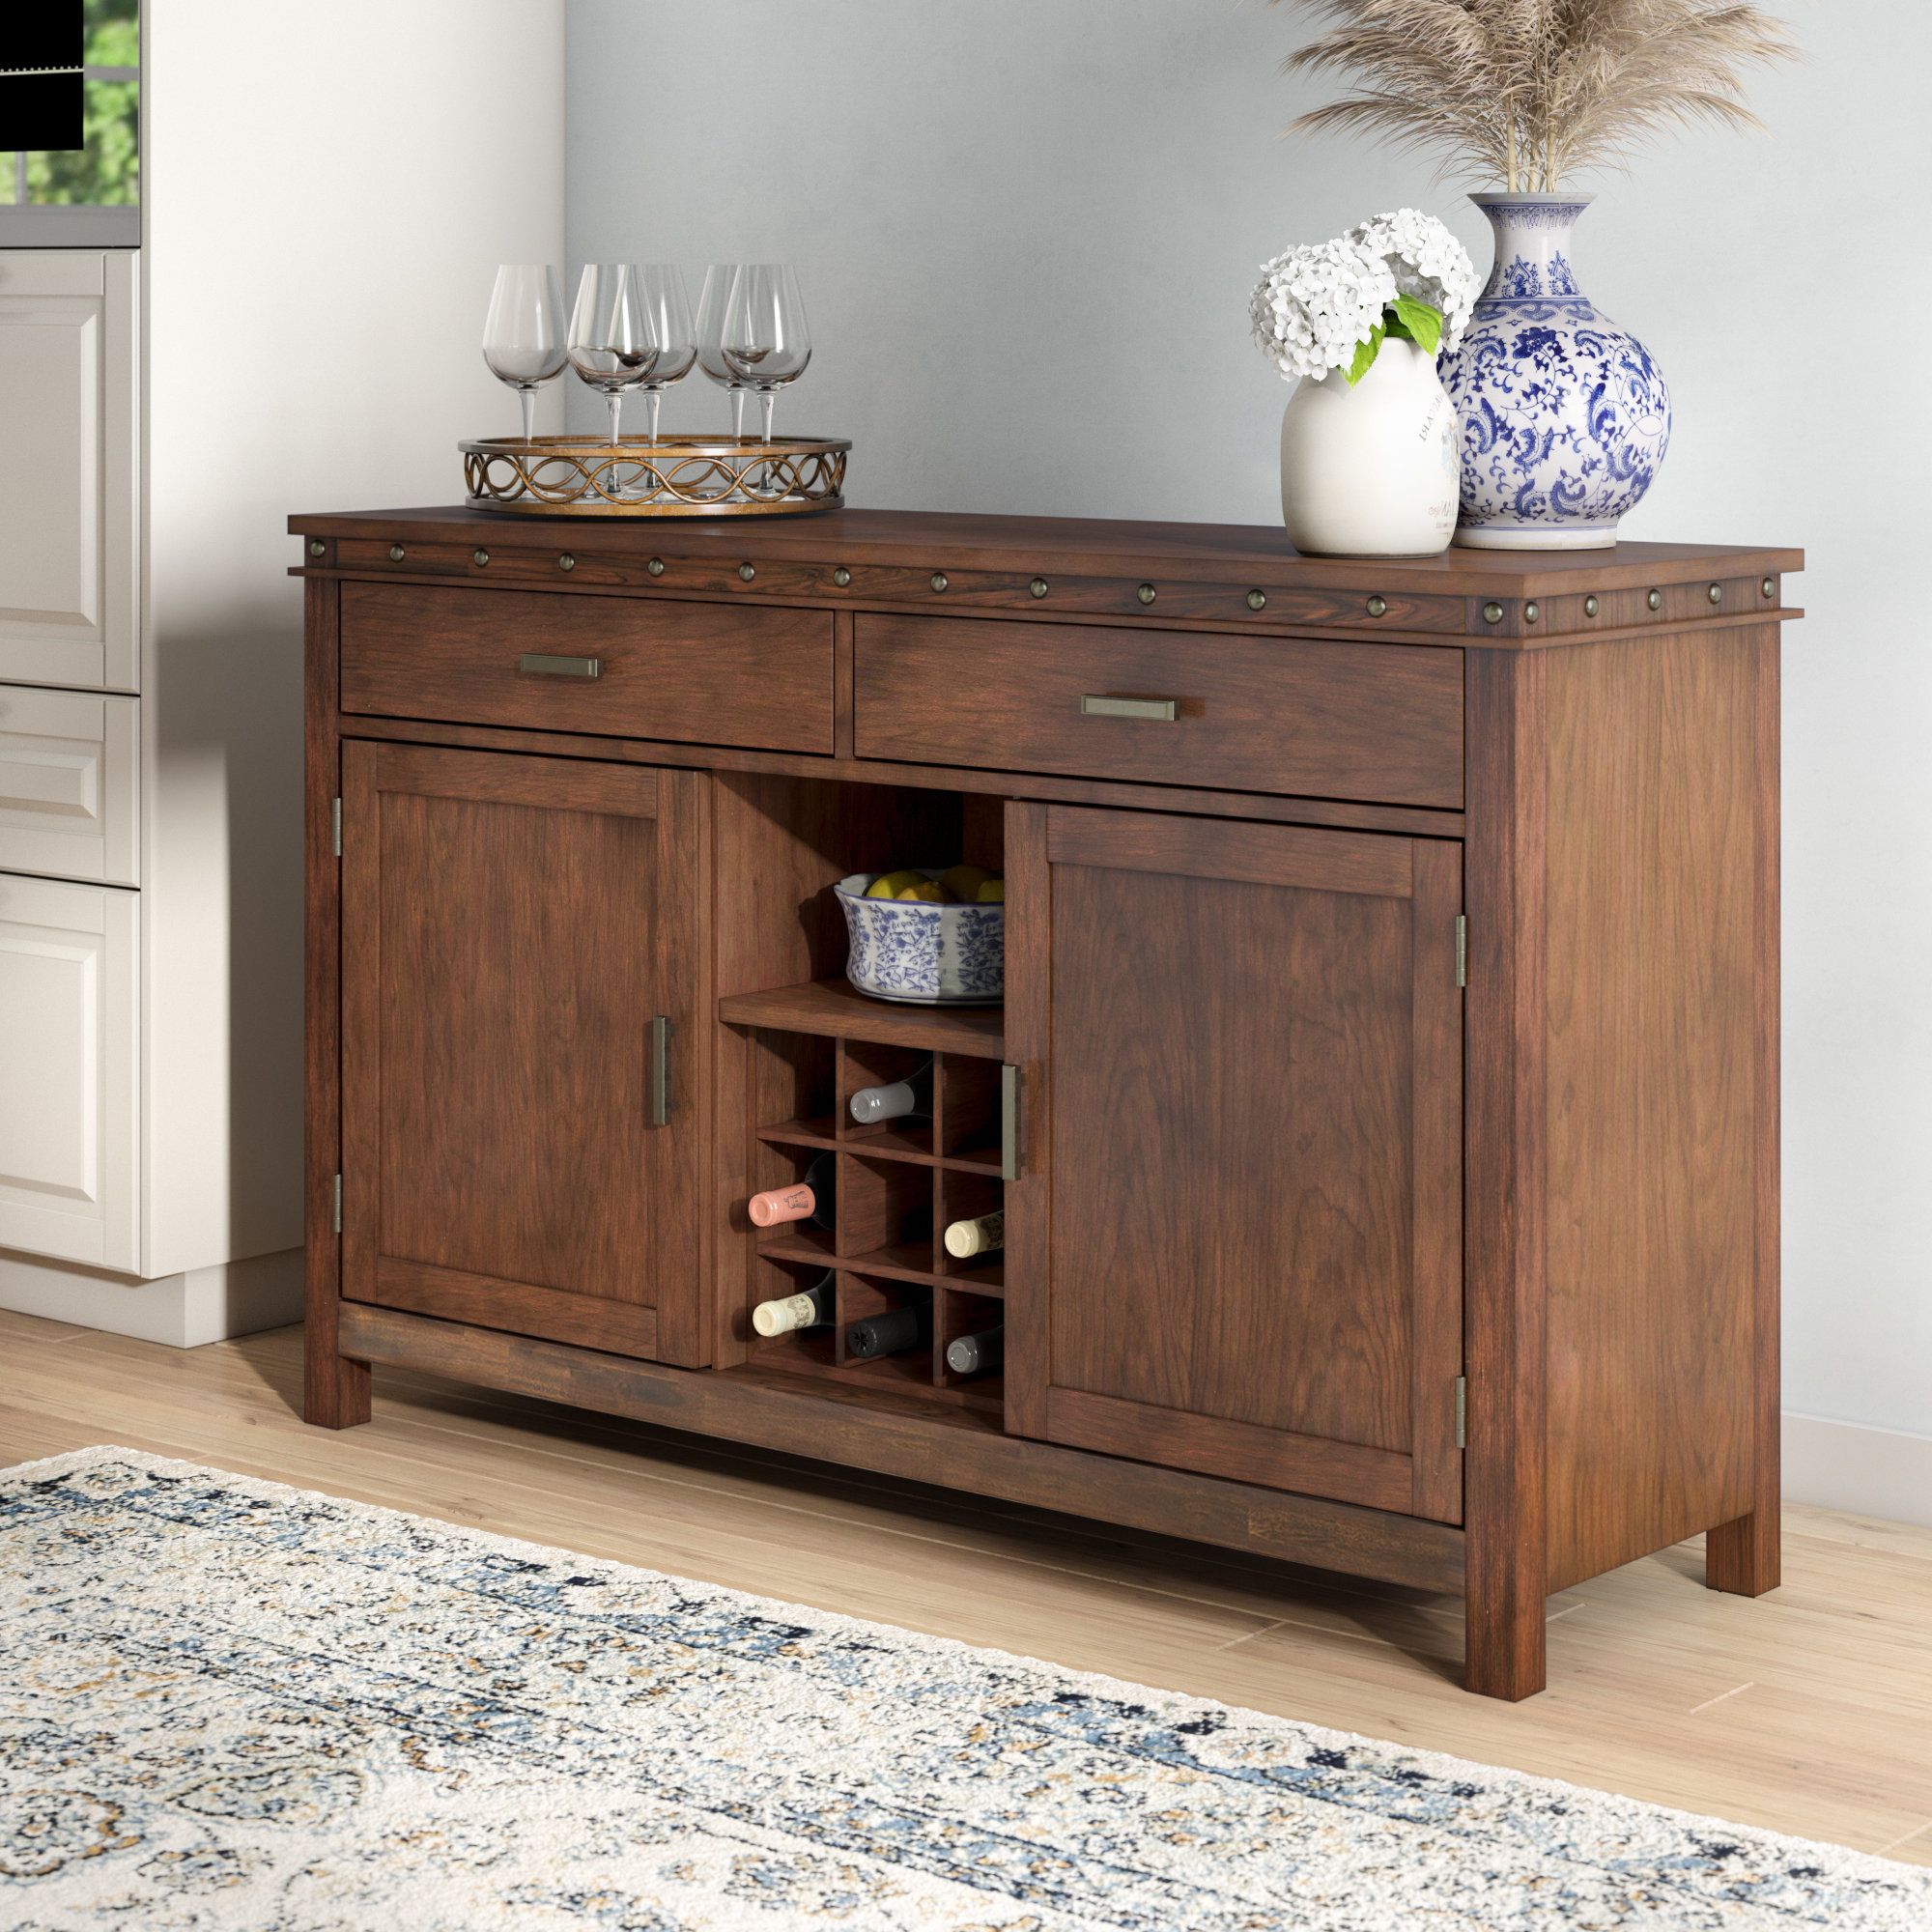 Darby Home Co Owen Sideboard For Chaffins Sideboards (View 10 of 20)